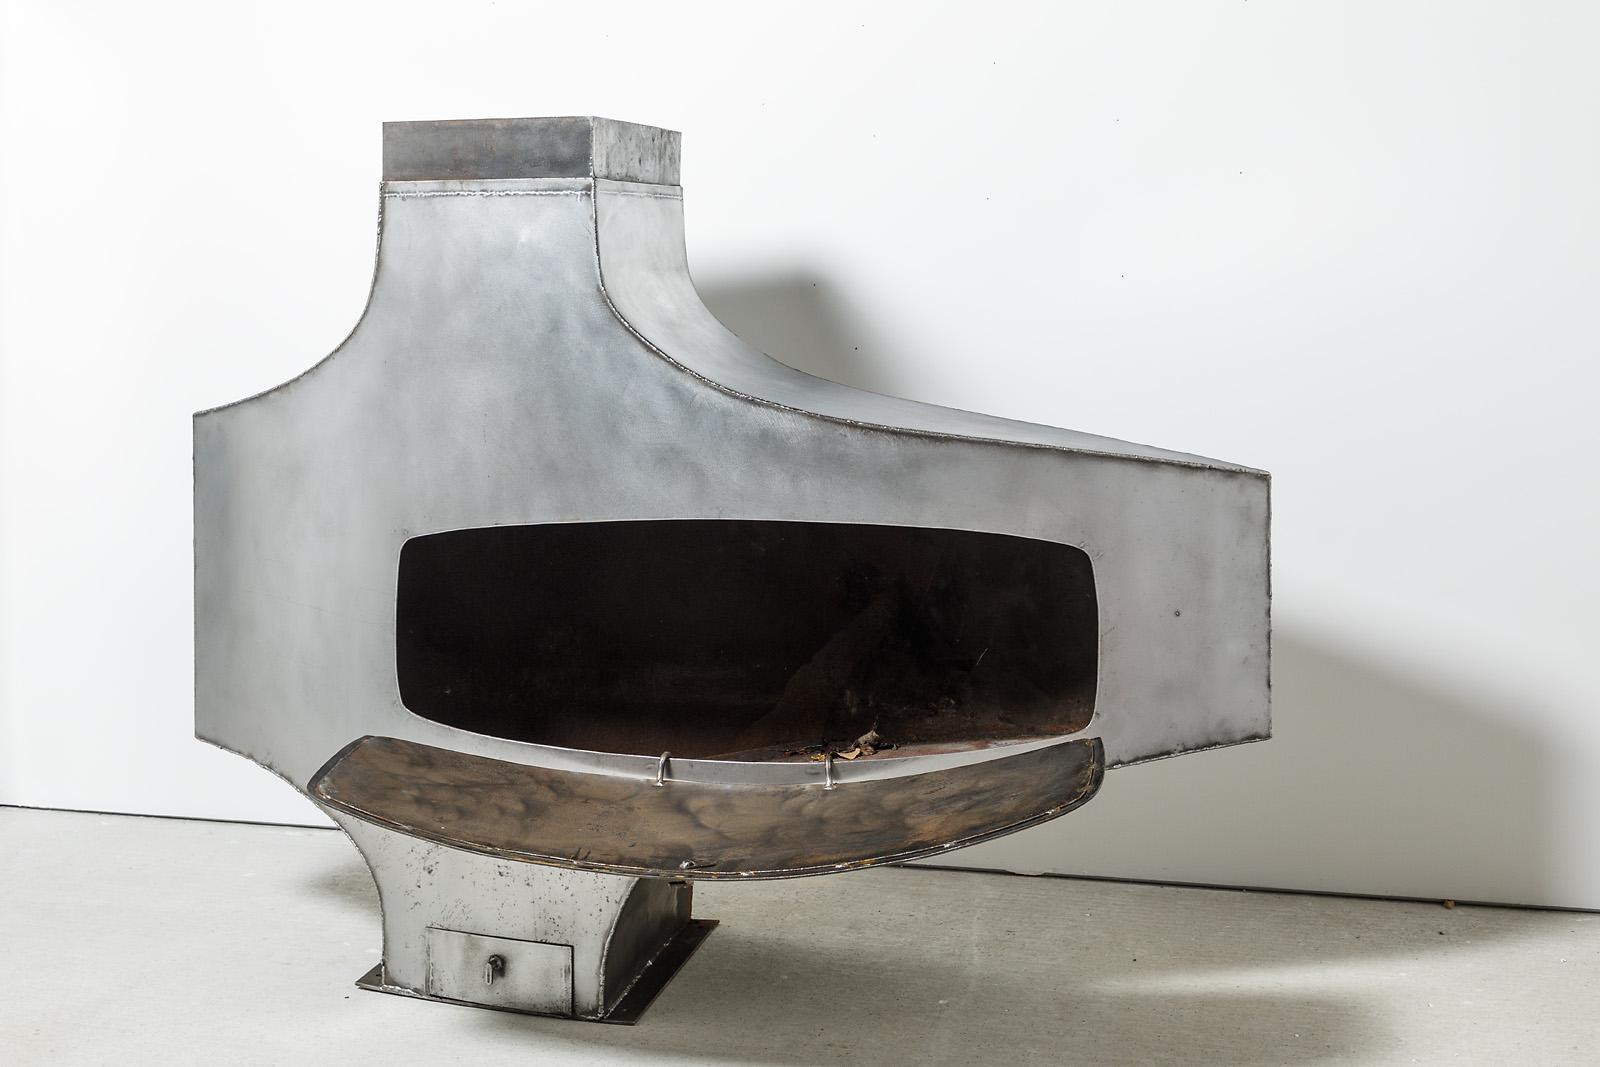 French Midcentury Iron Sculptural Fireplace Abstract Form by Imbert, circa 1980